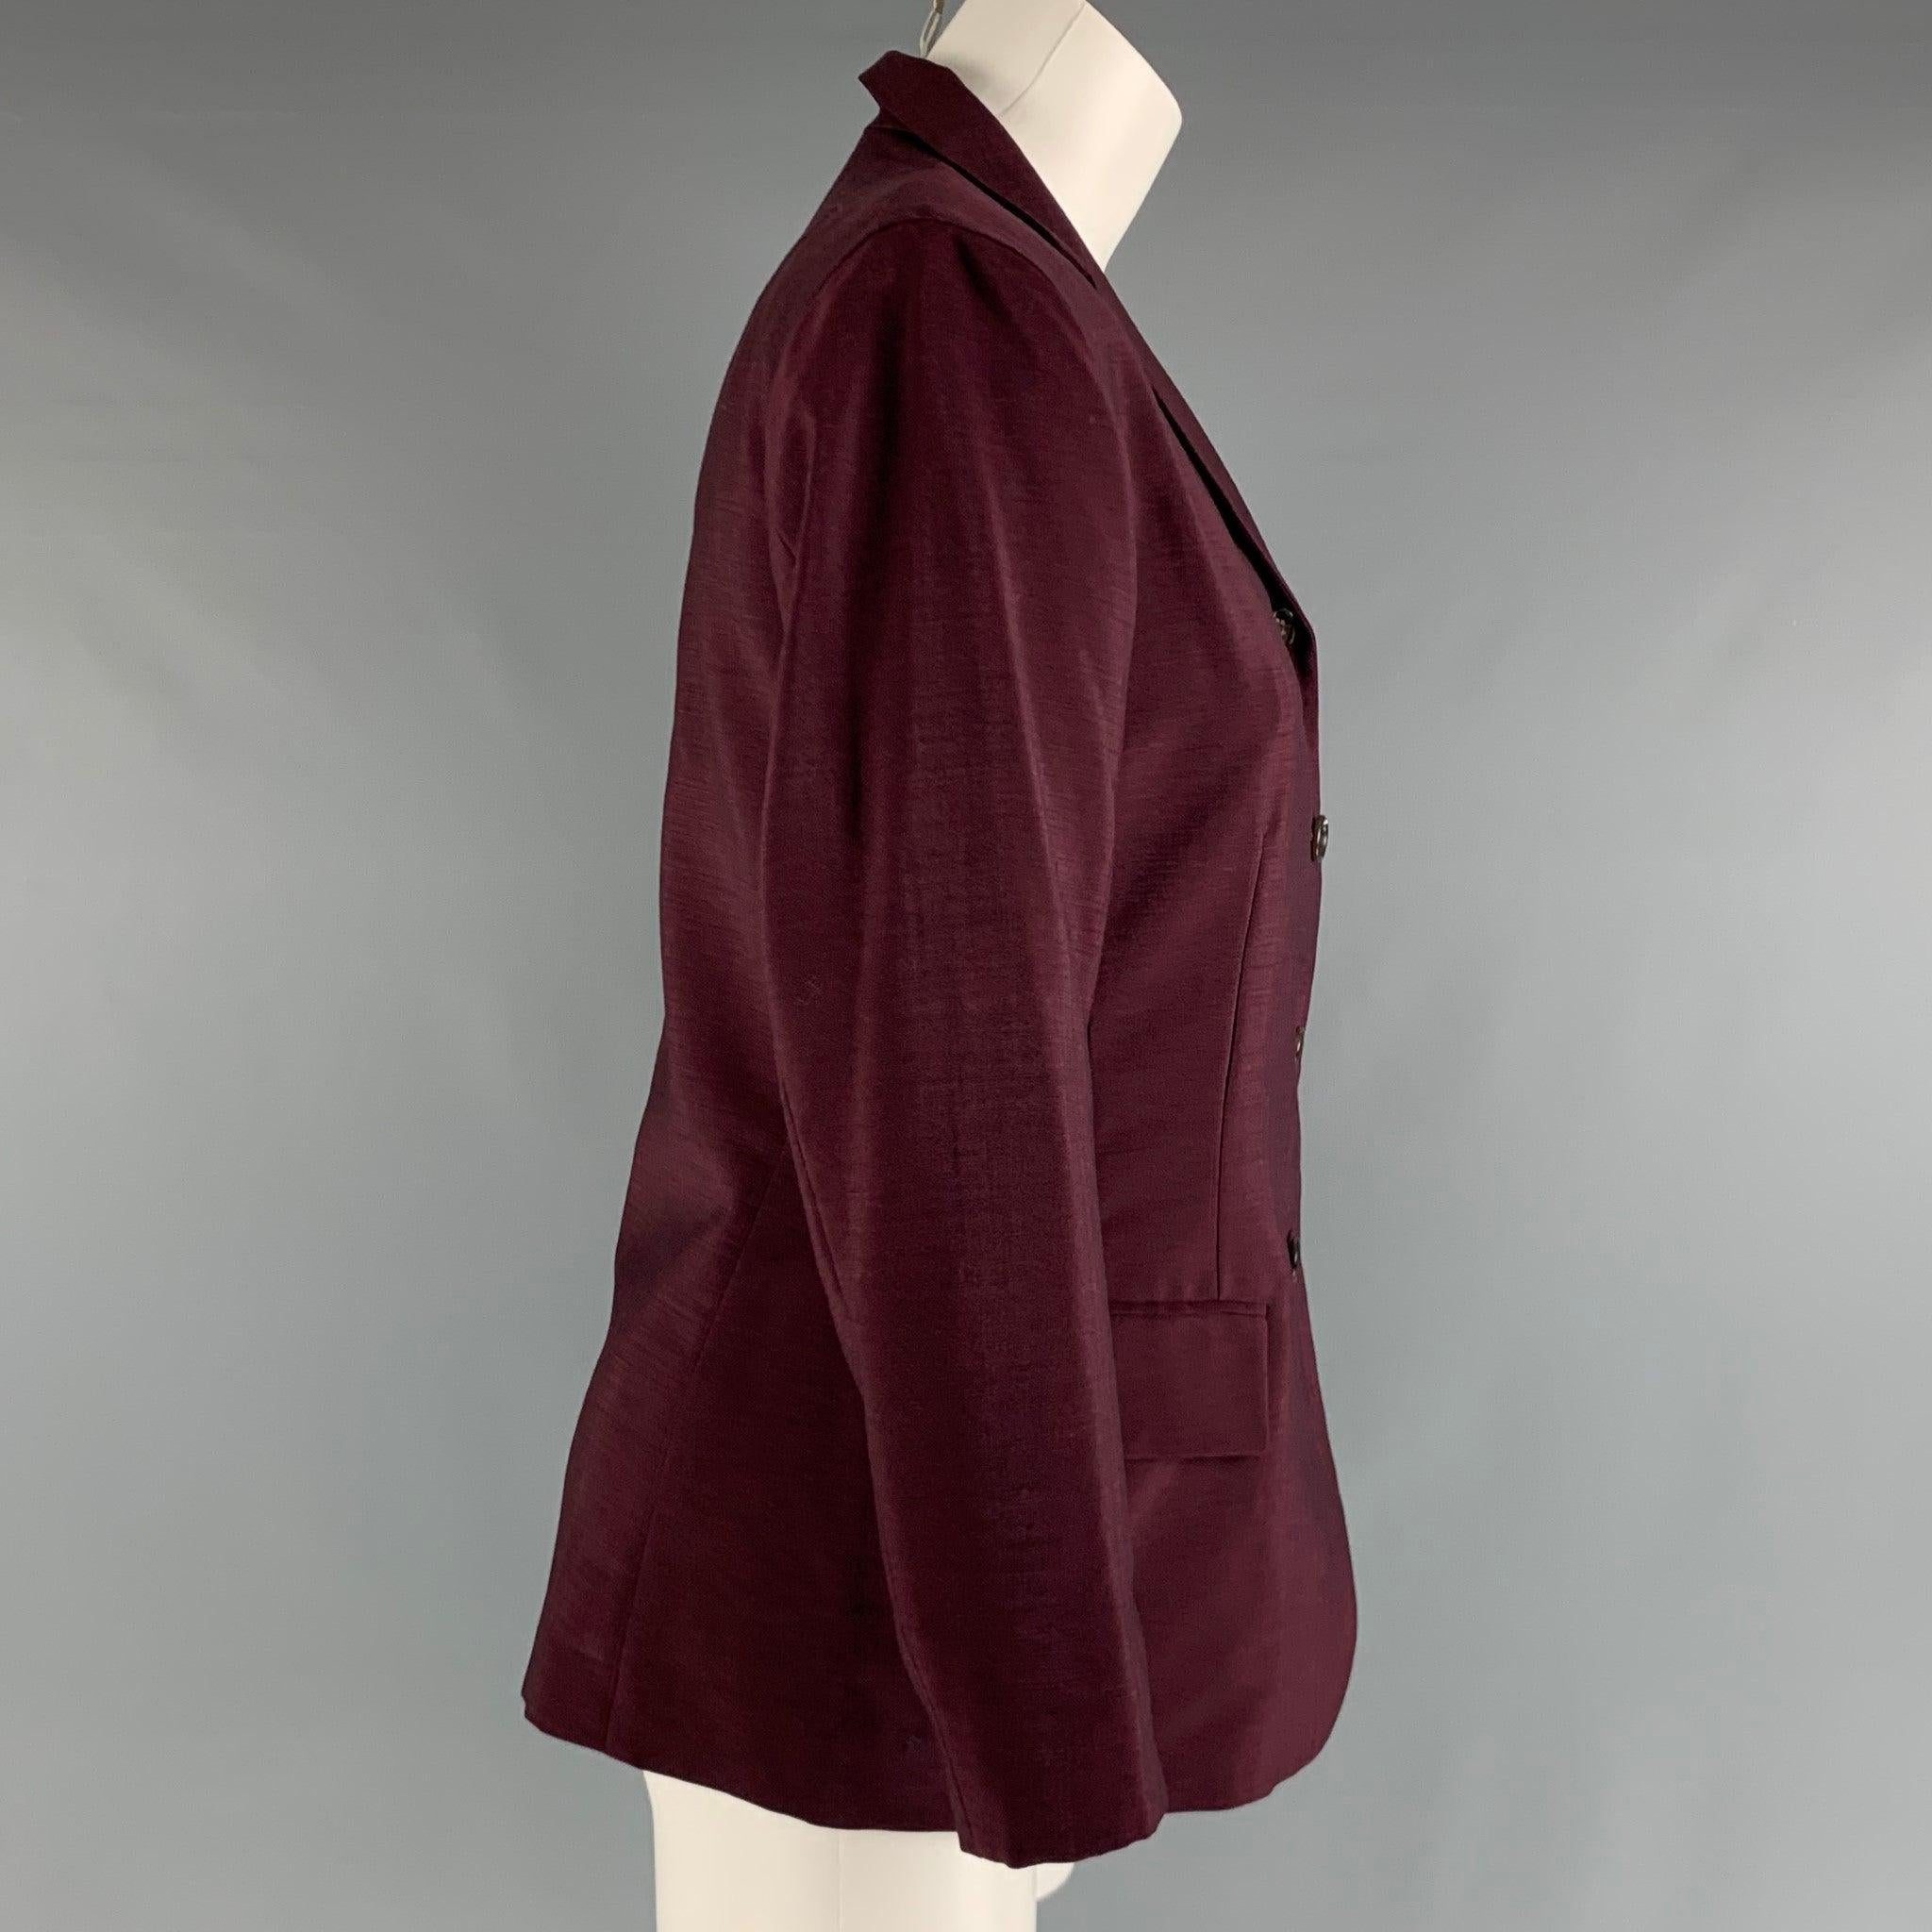 JIL SANDER jacket comes in a burgundy wool and mohair woven material featuring a front pockets, and a four button closure. Made in Germany.Excellent Pre- Owned Conditions. 

Marked:   38 

Measurements: 
 
Shoulder: 16 inches  
 Bust: 36 inches